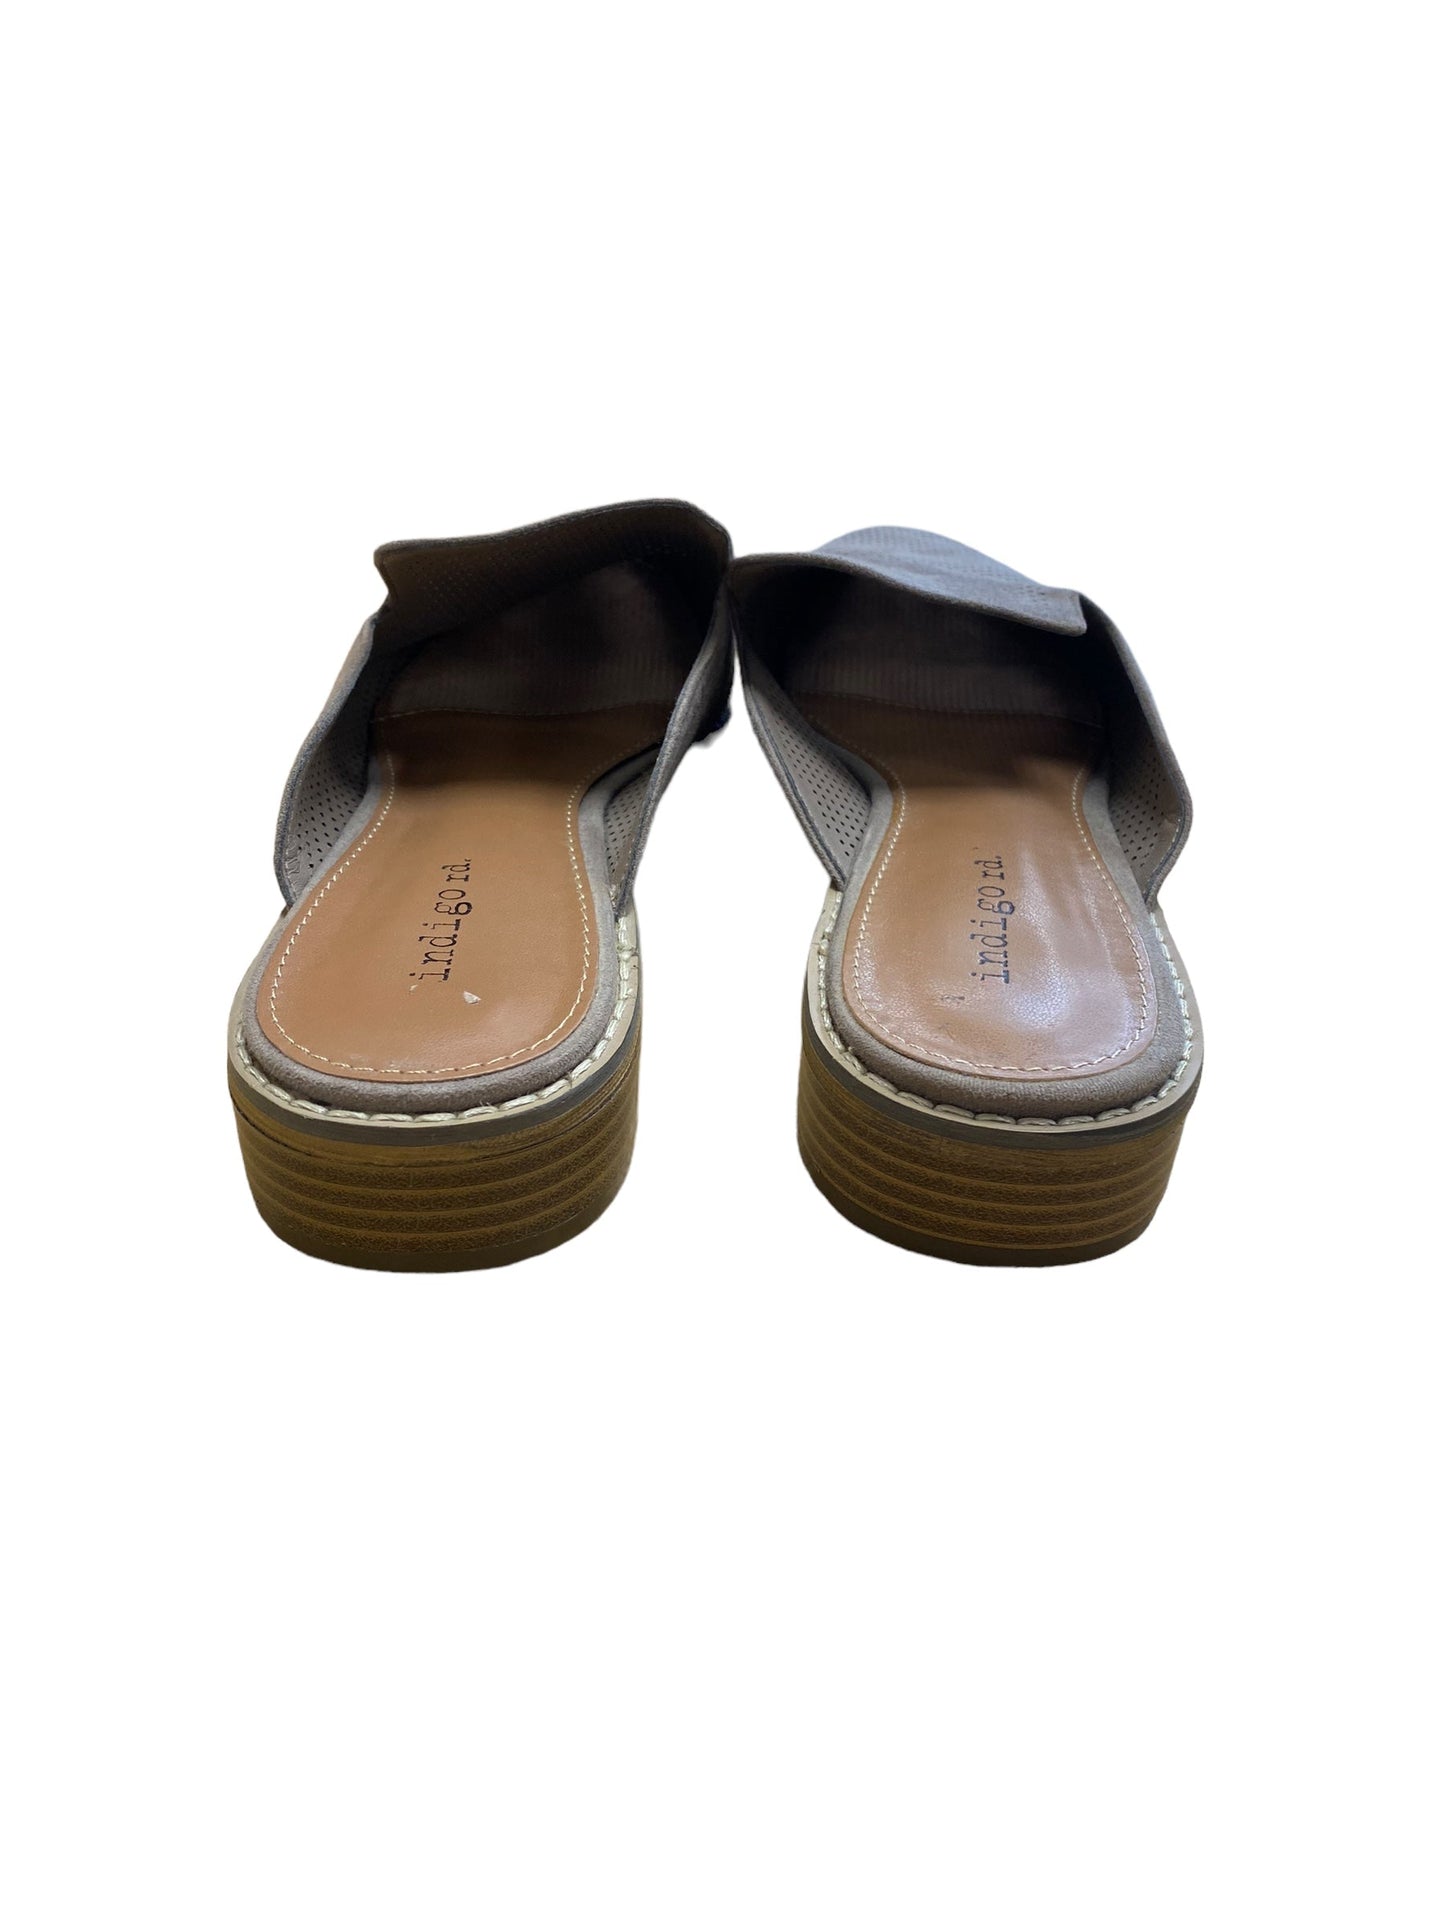 Shoes Flats By Indigo Rd  Size: 7.5